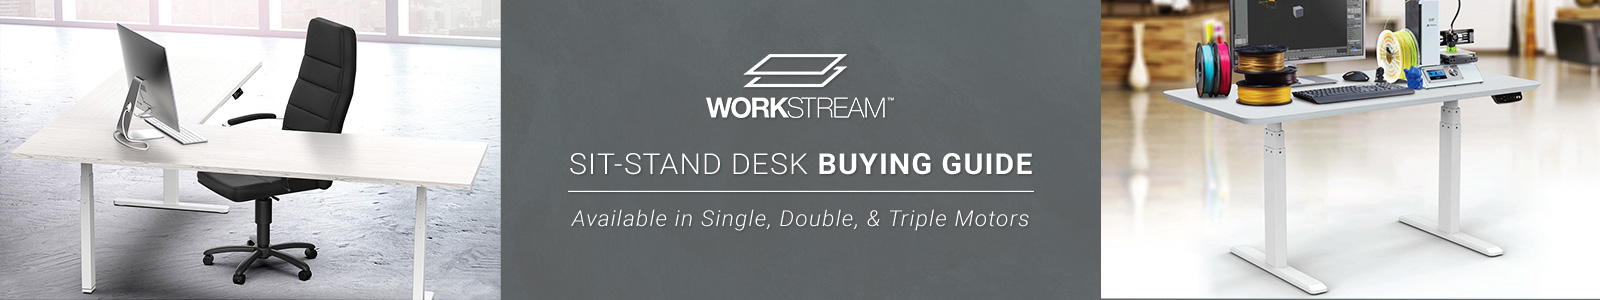 Workstream Sit-Stand Desk Buying Guide. Available in Single, Double, & Triple Motors.